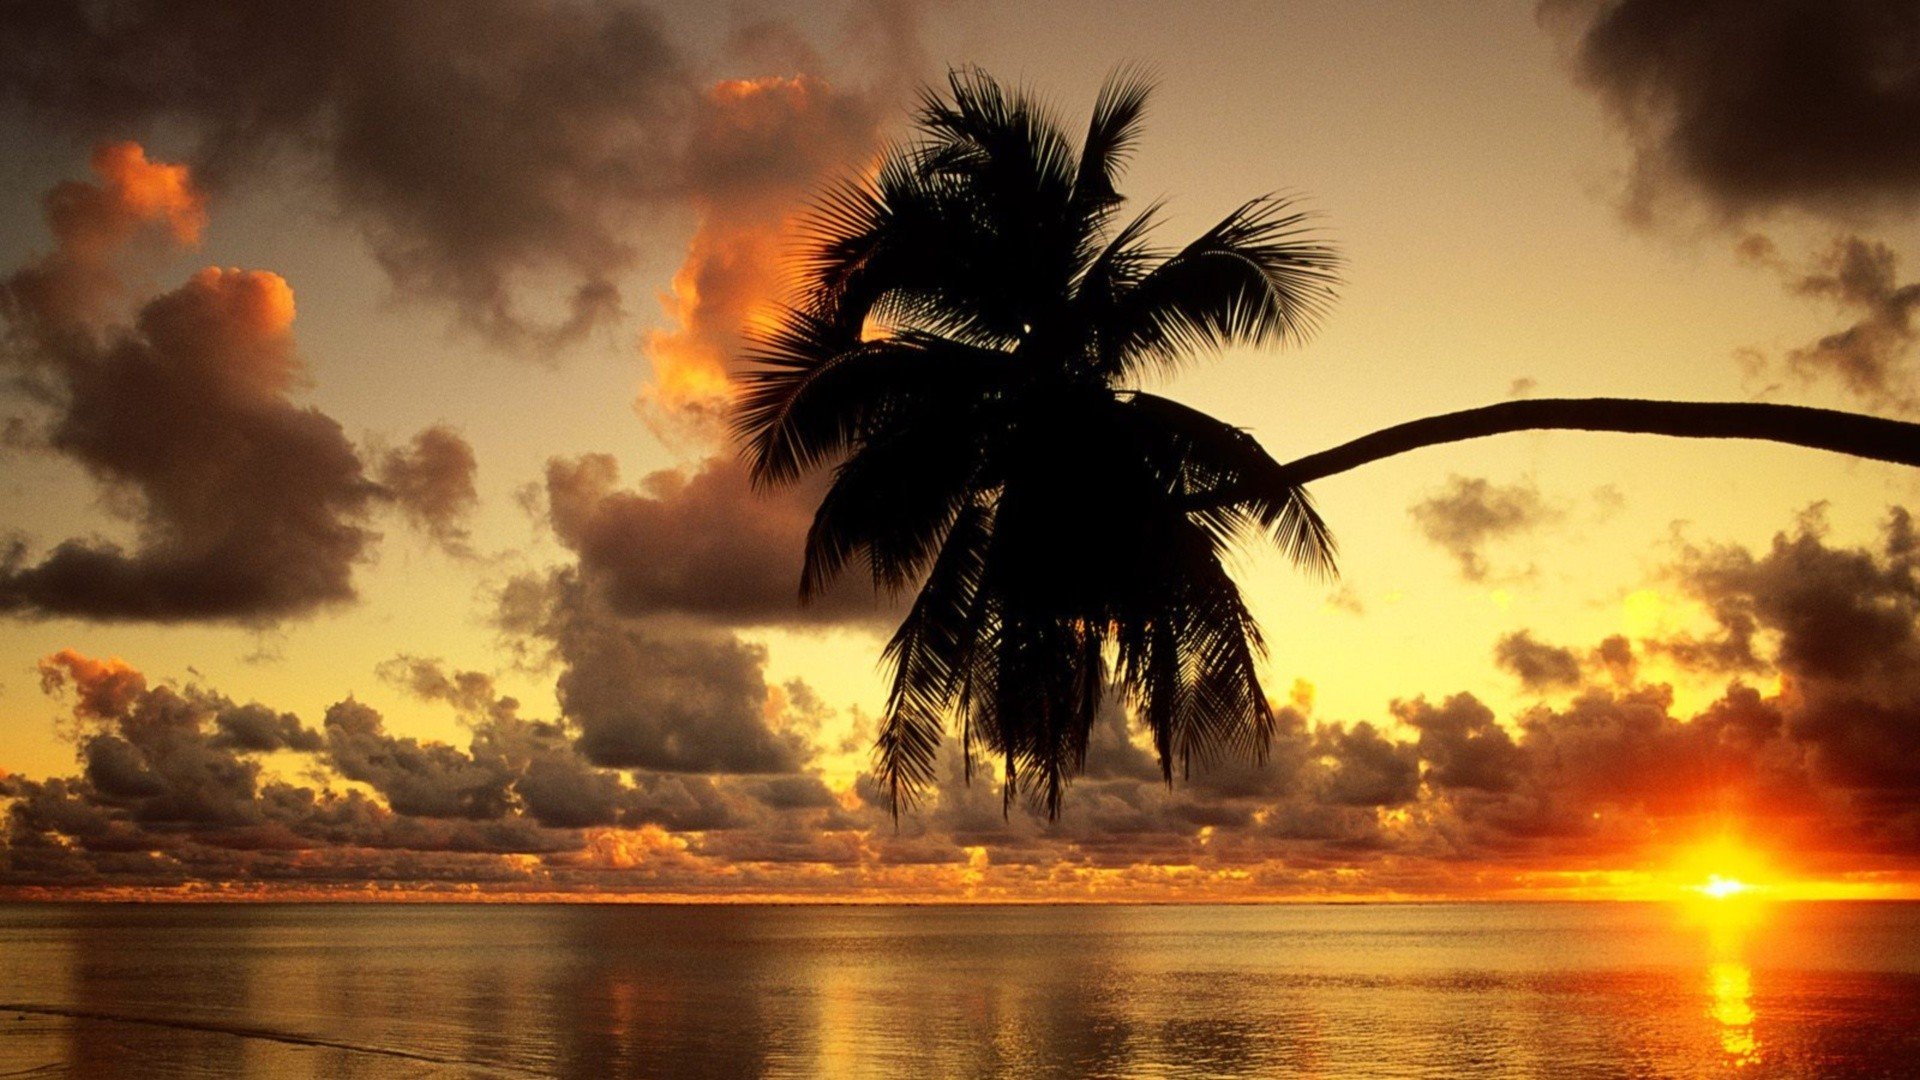 sunset, Clouds, Silhouettes, Palm, Trees, Sea Wallpaper